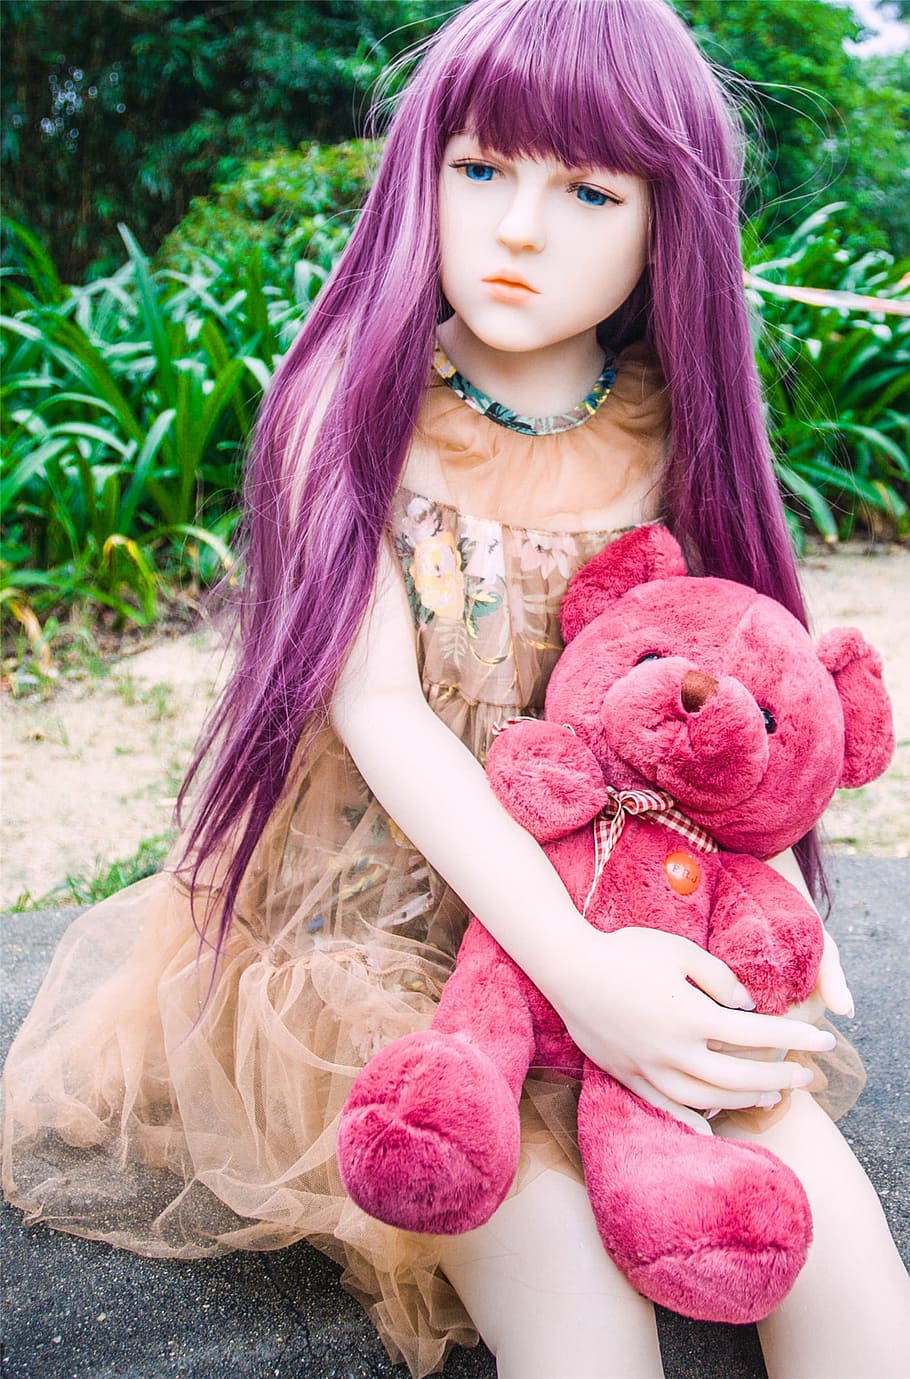 doll, looks real, toy, silicone, teddy bear, pink, rubber, realistic, long hair, girl